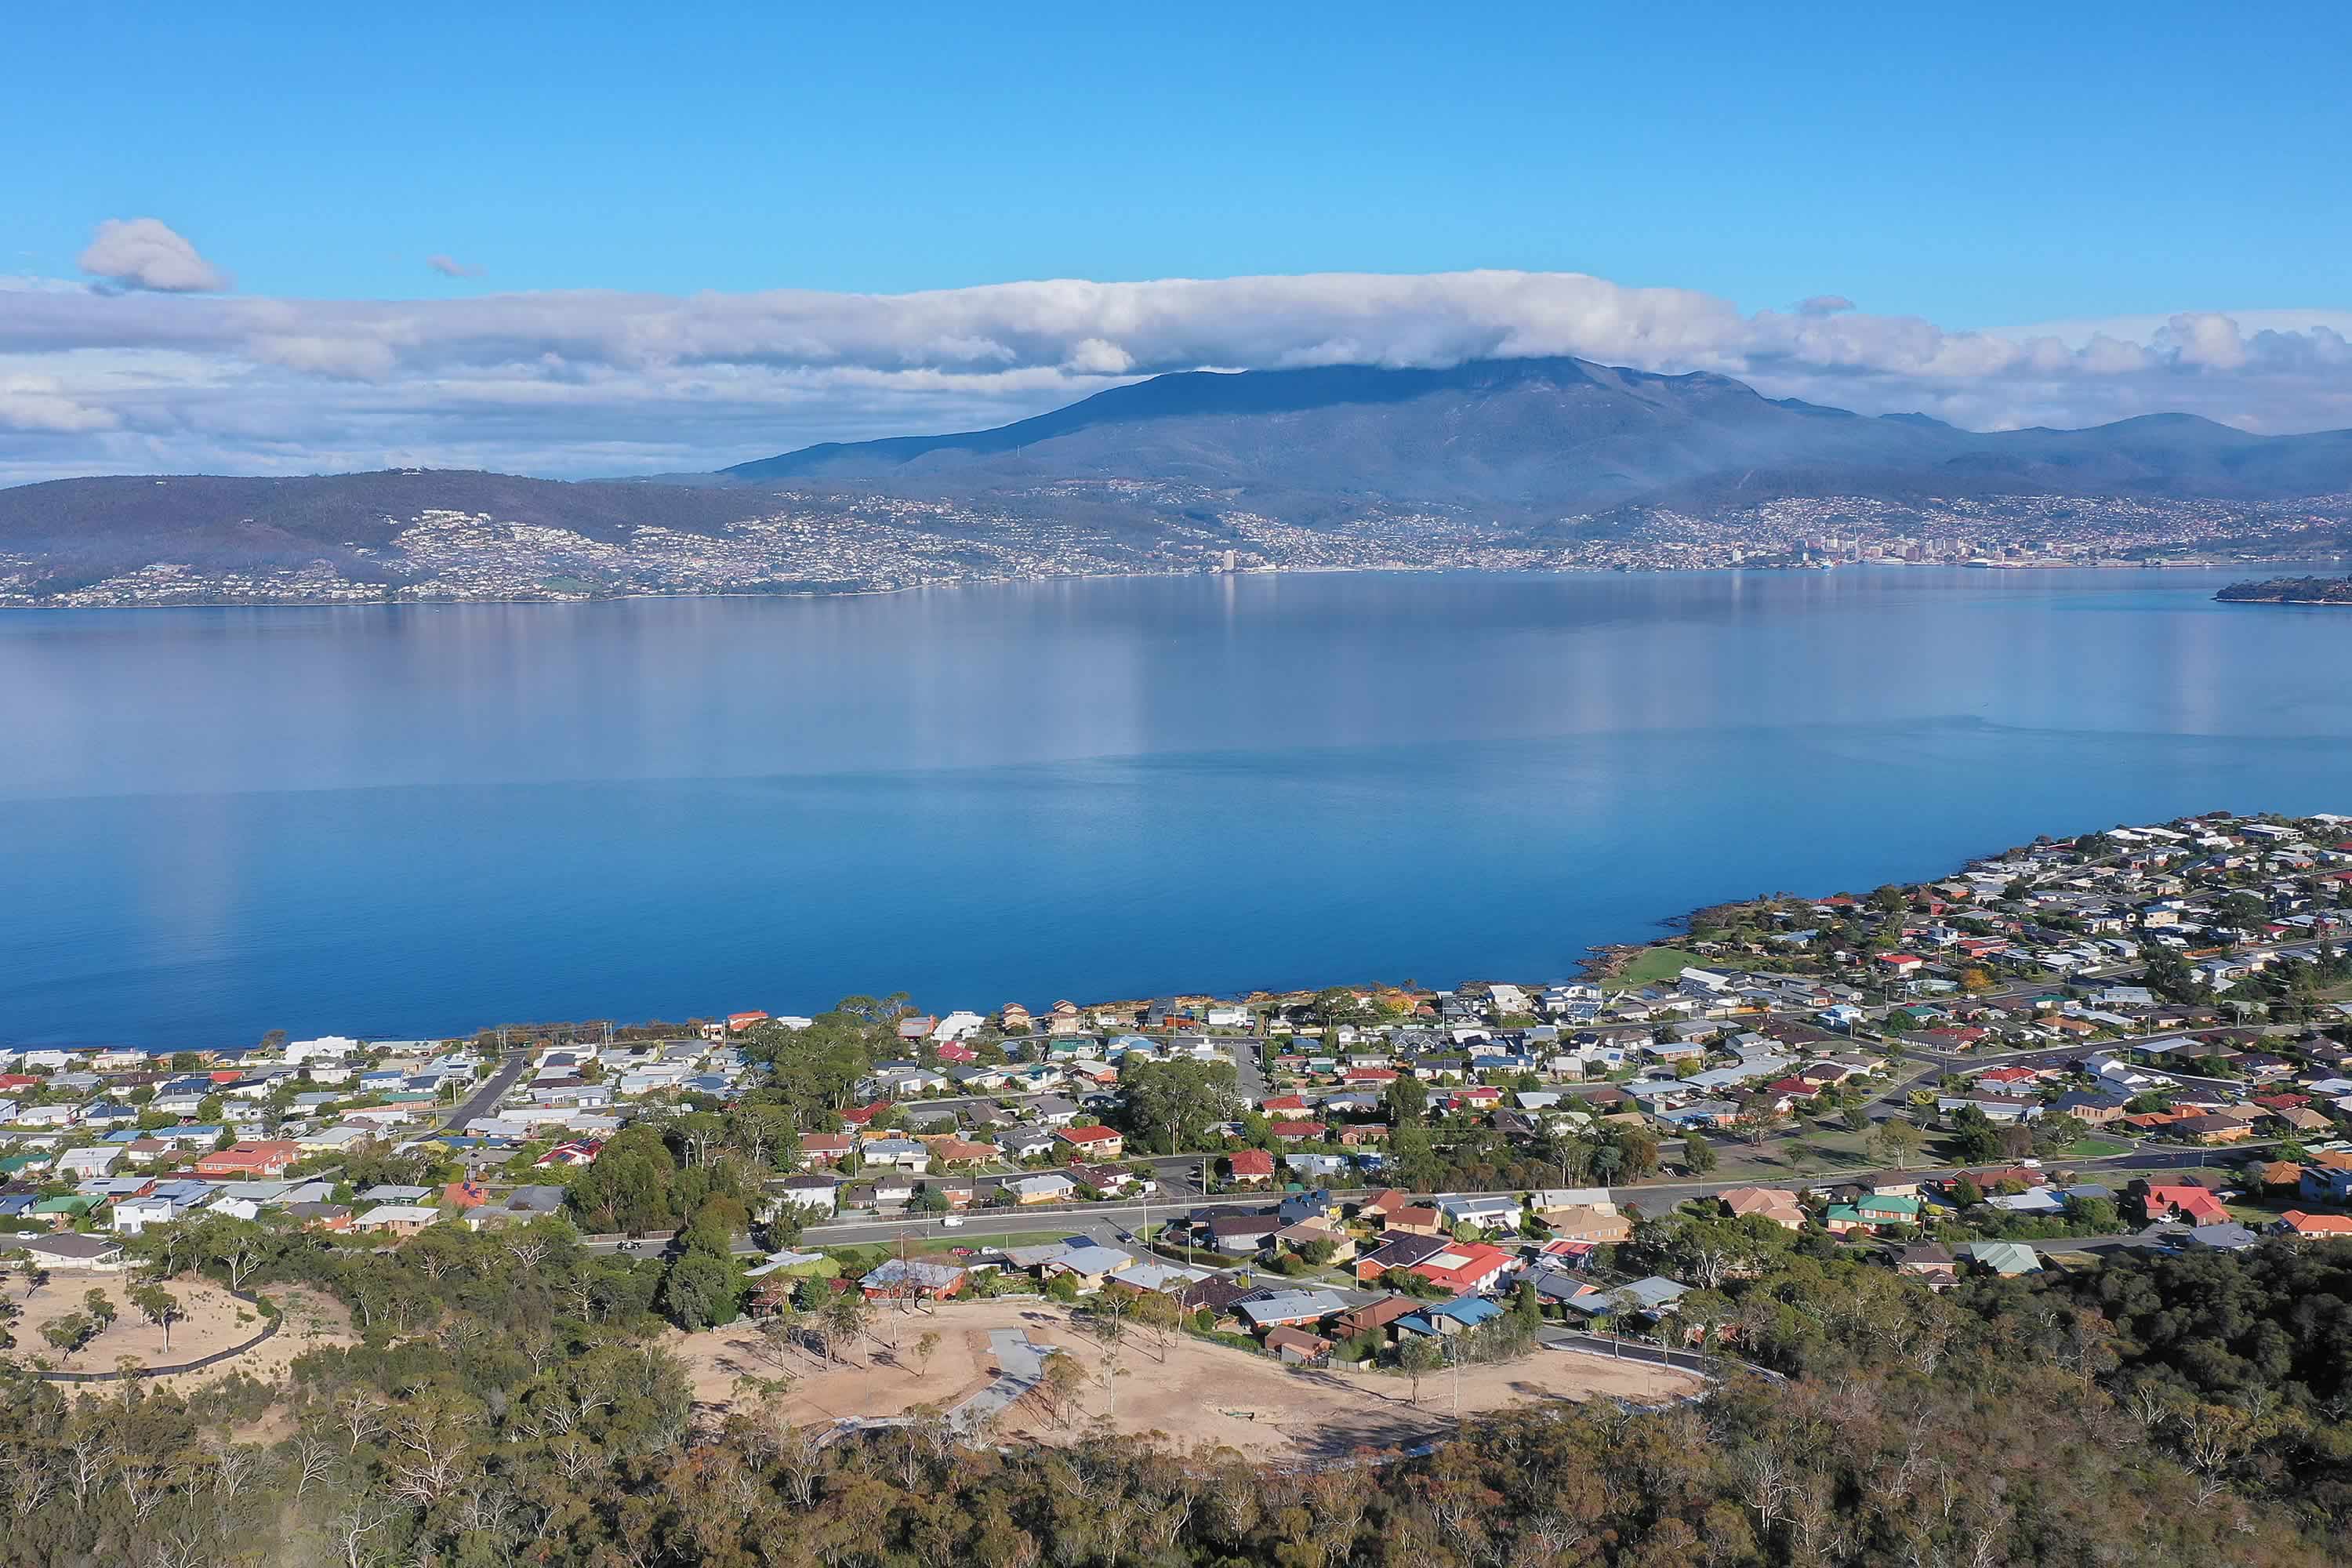 View from Tunah Street looking west towards the Hobart city centre, Sandy Bay, and kunanyi / Mount Wellington. Photo: Owen Fielding.